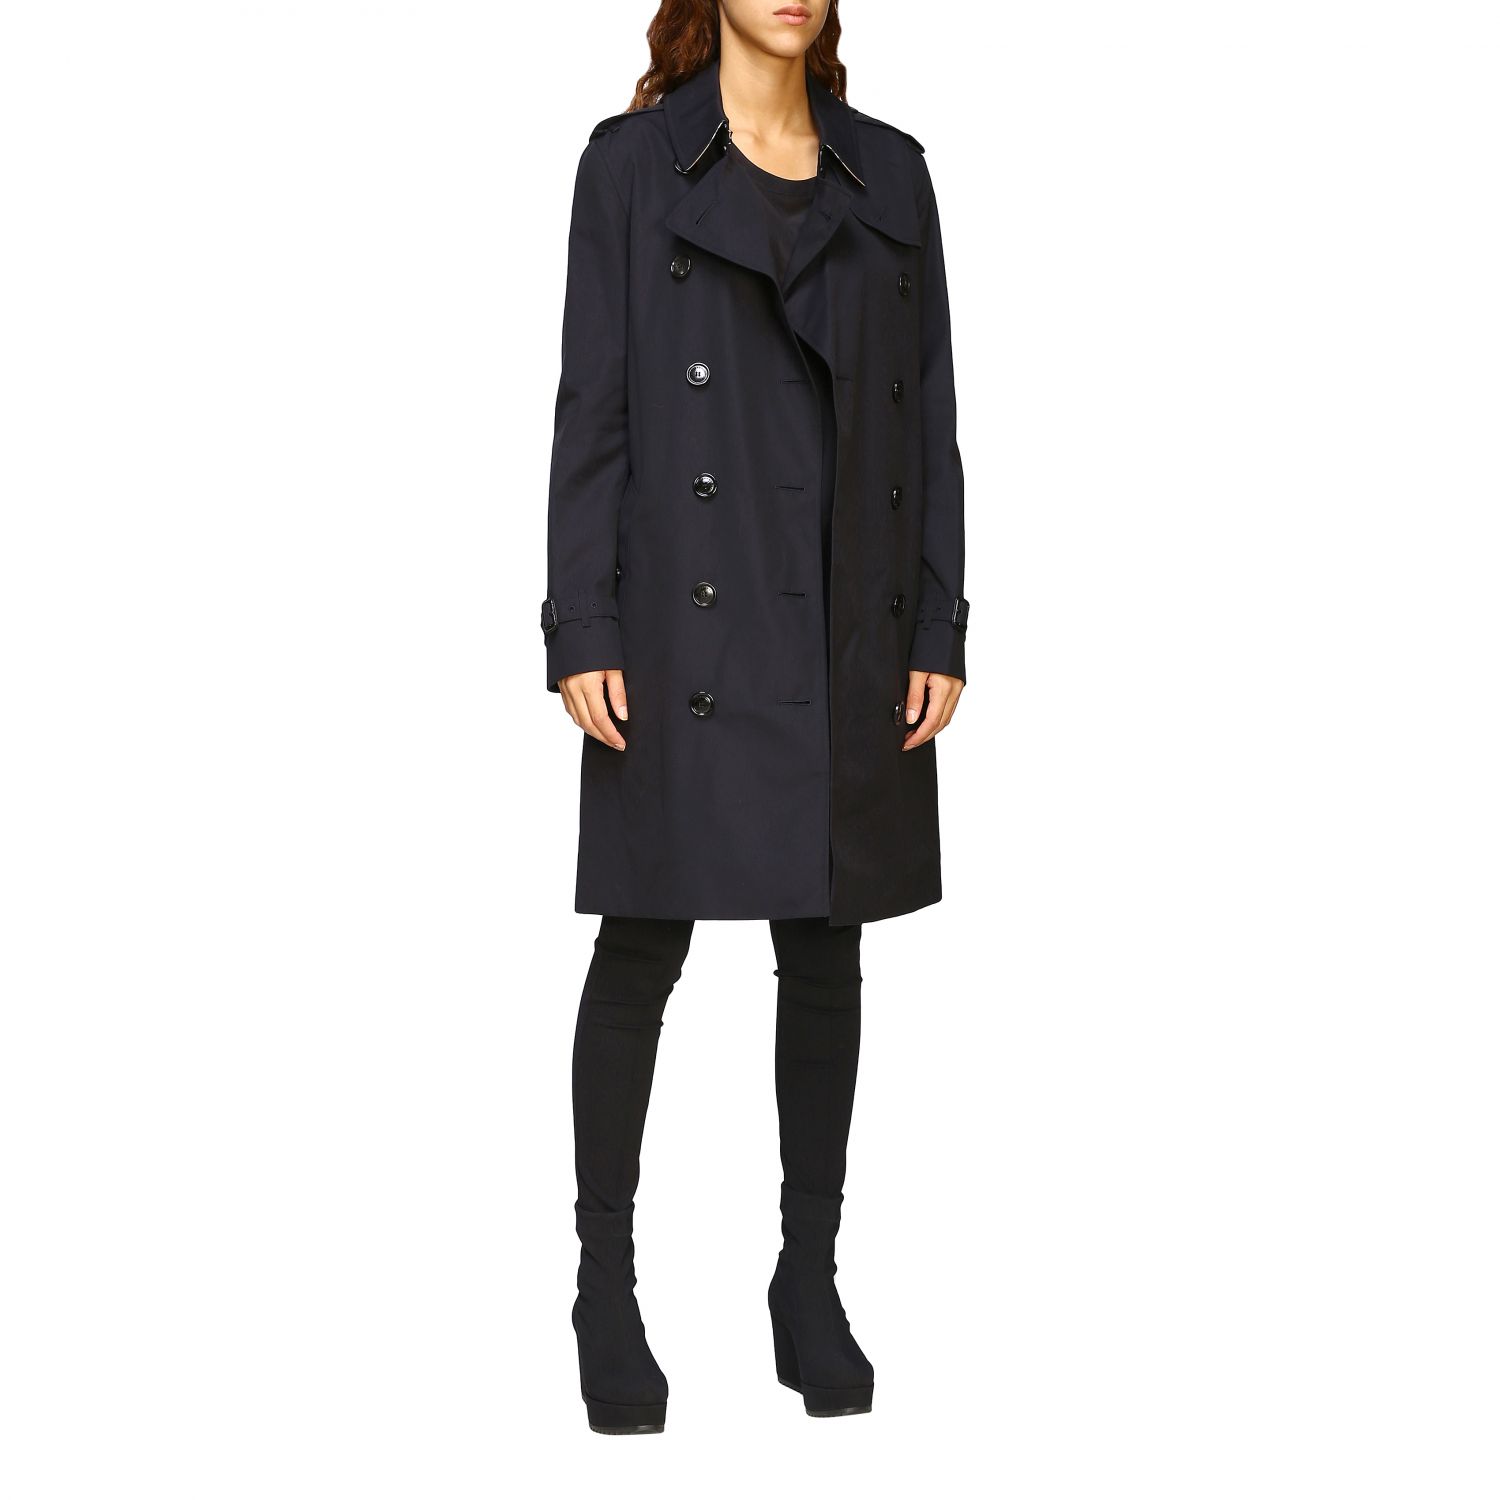 Burberry Outlet: jacket for woman - Black | Burberry jacket 4073371 ...